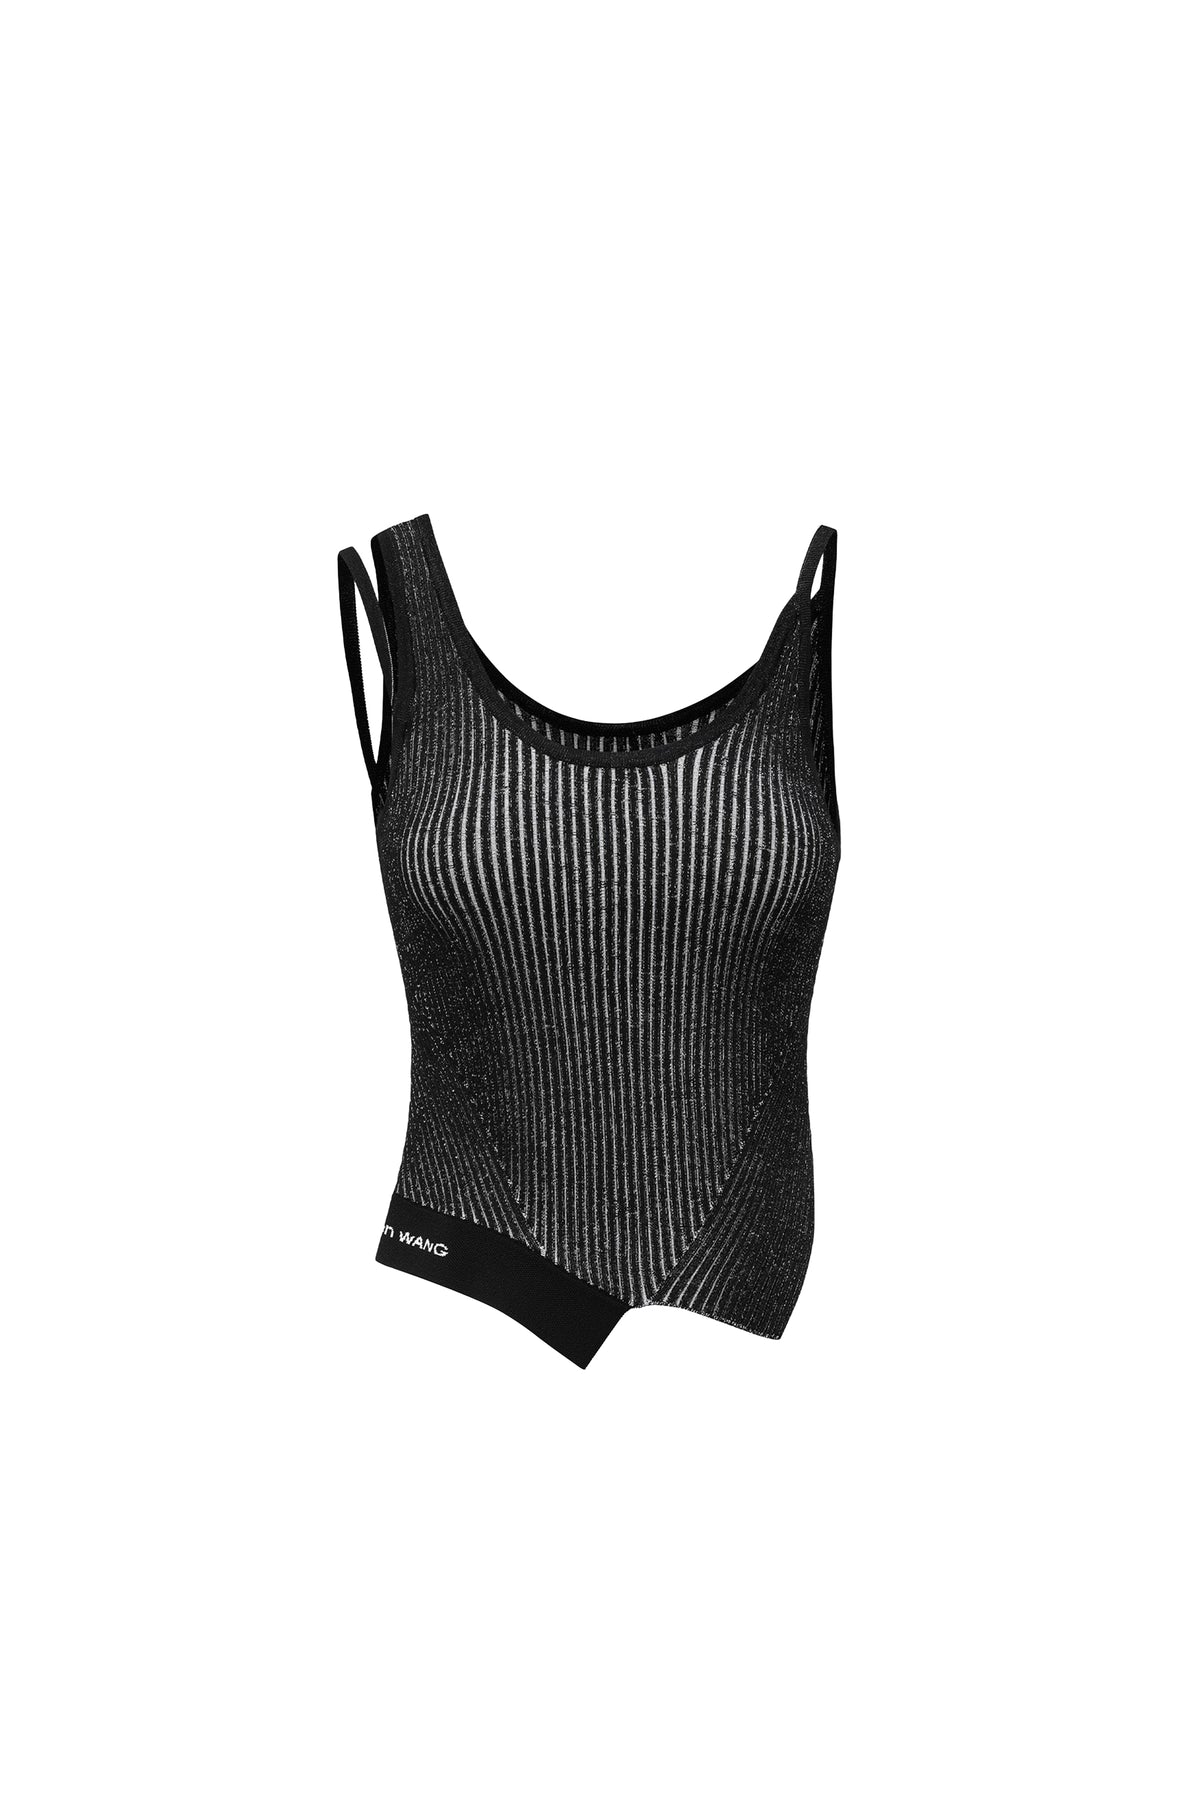 DECONSTRUCTED KNITTED TANK TOP / BLK